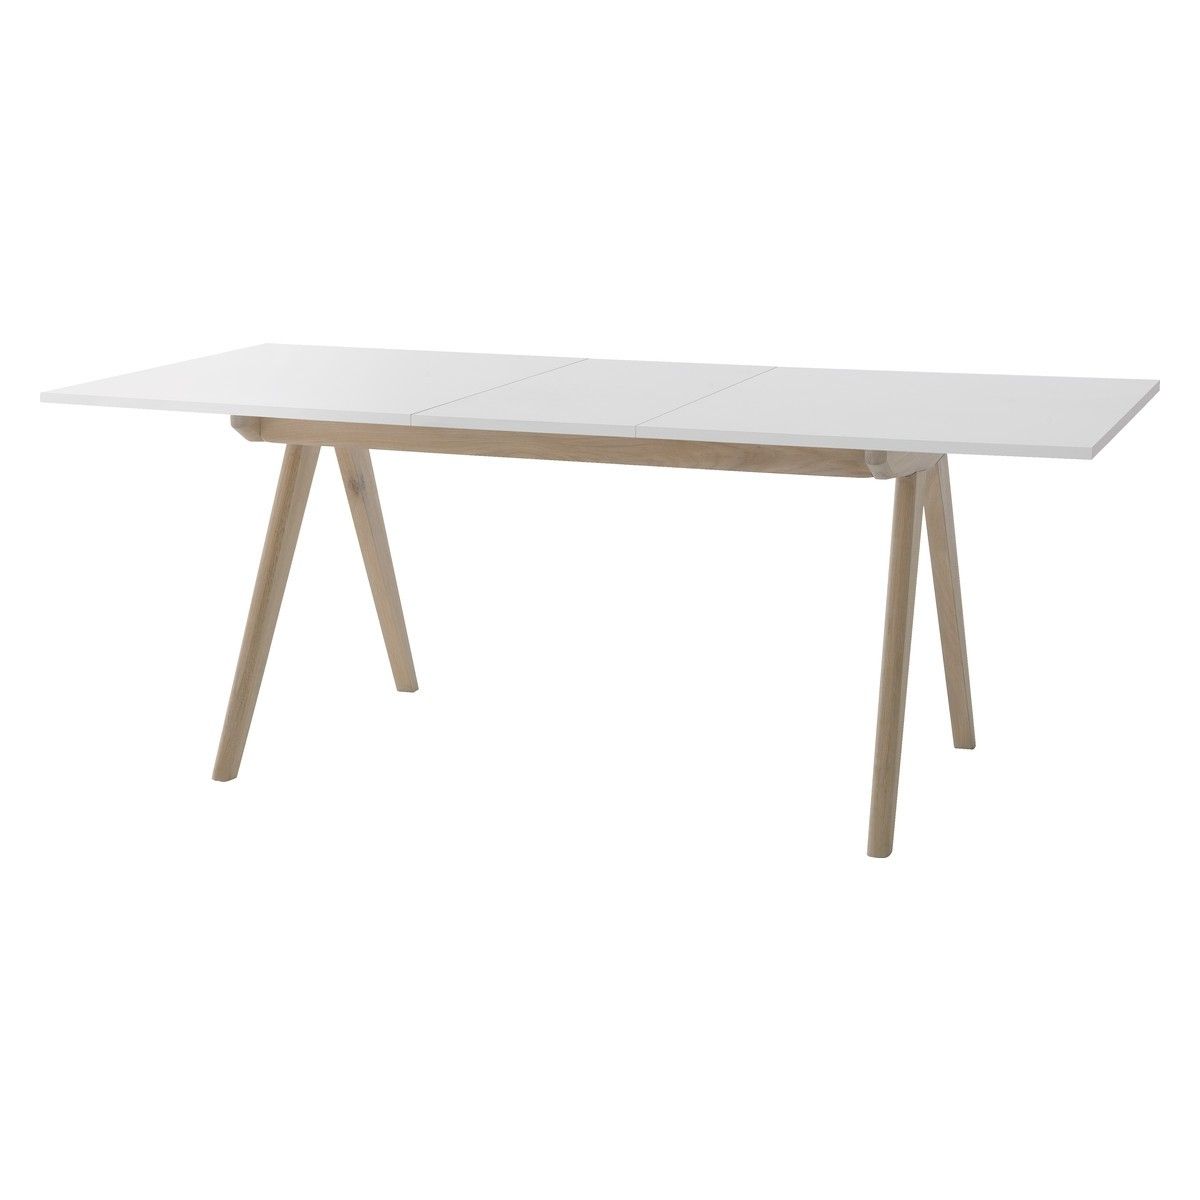 Buy Now At Habitat Uk Pertaining To White Melamine Dining Tables (View 1 of 25)